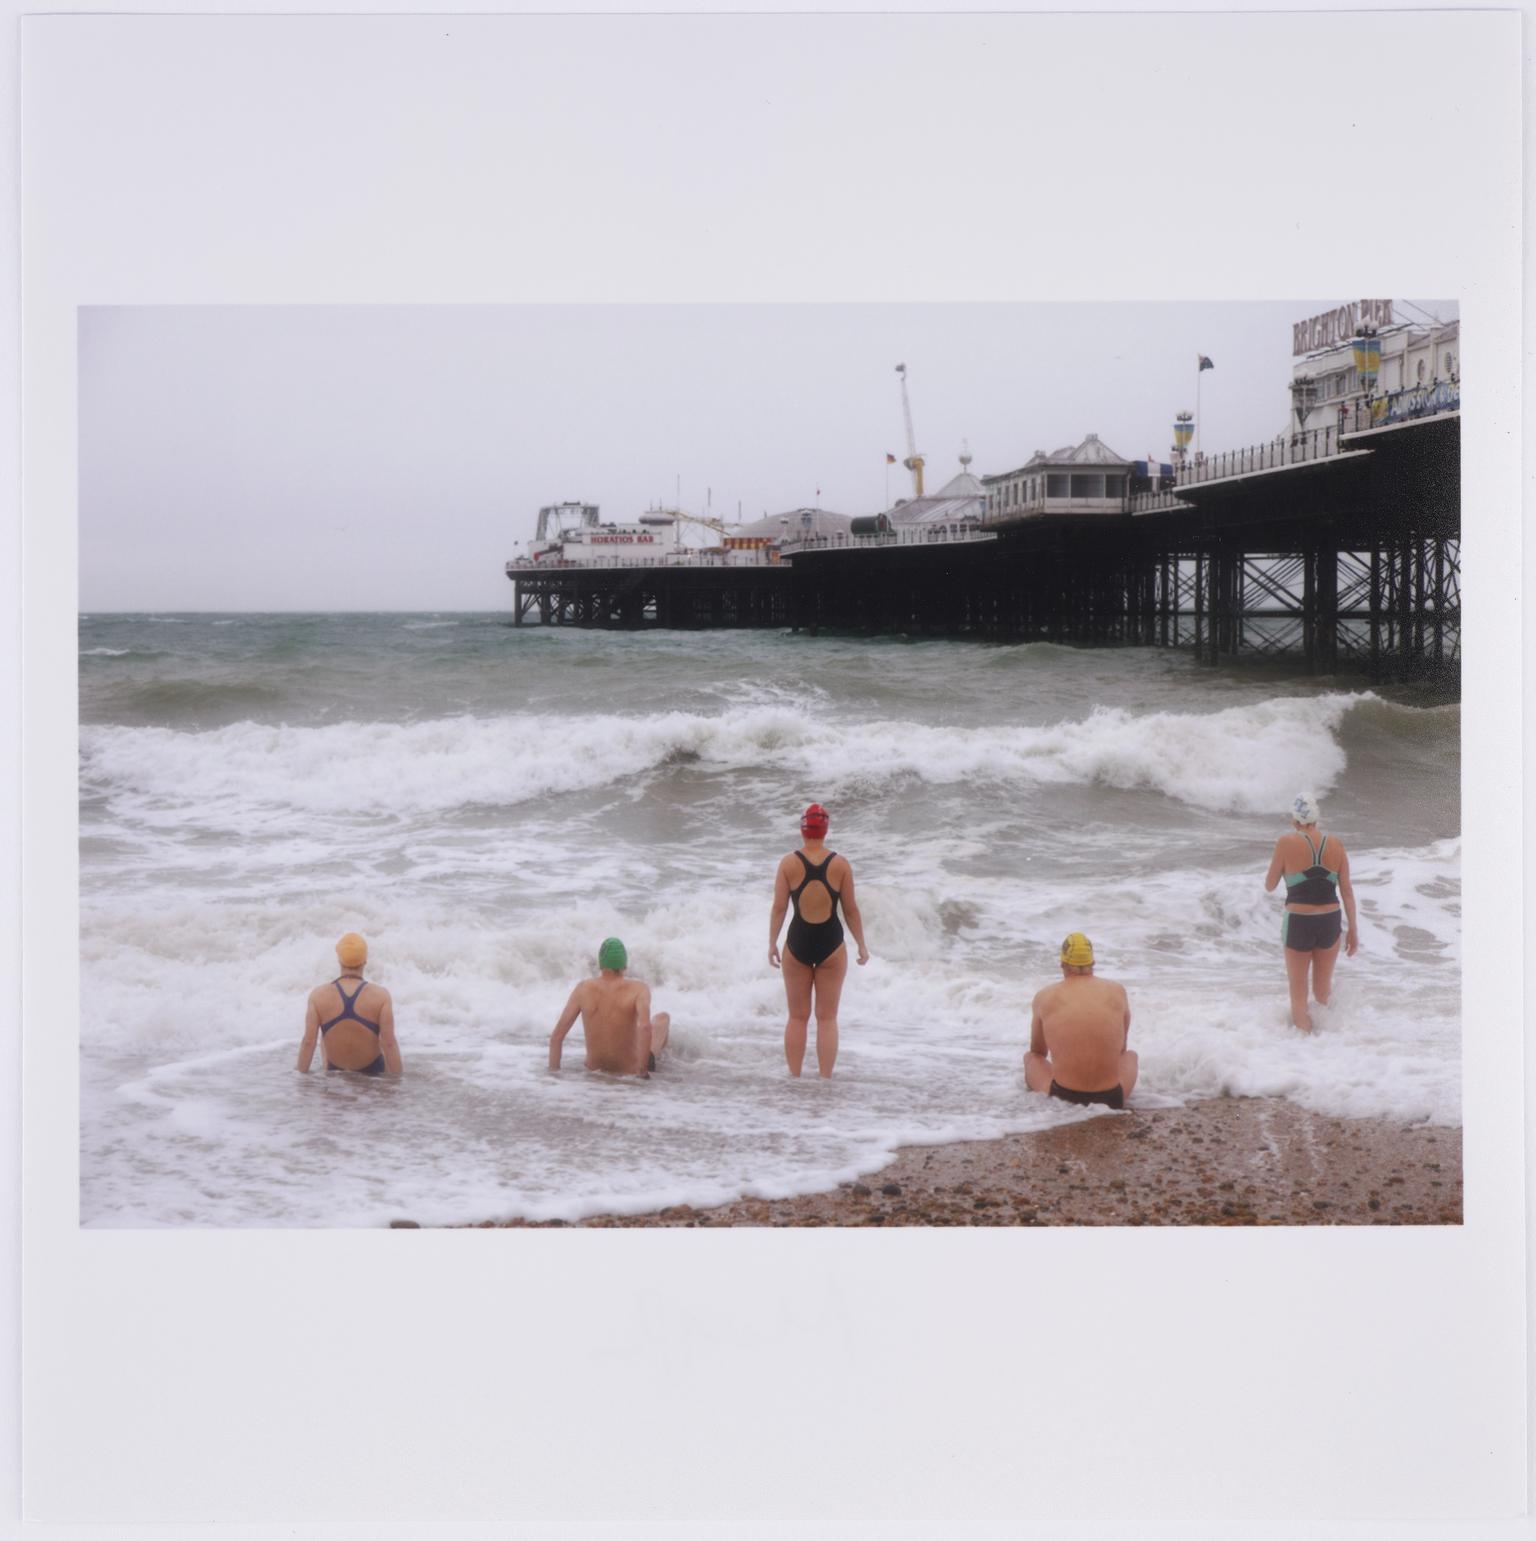 Members of the Sea Swimming Club who meet daily to swim in the sea, Brighton